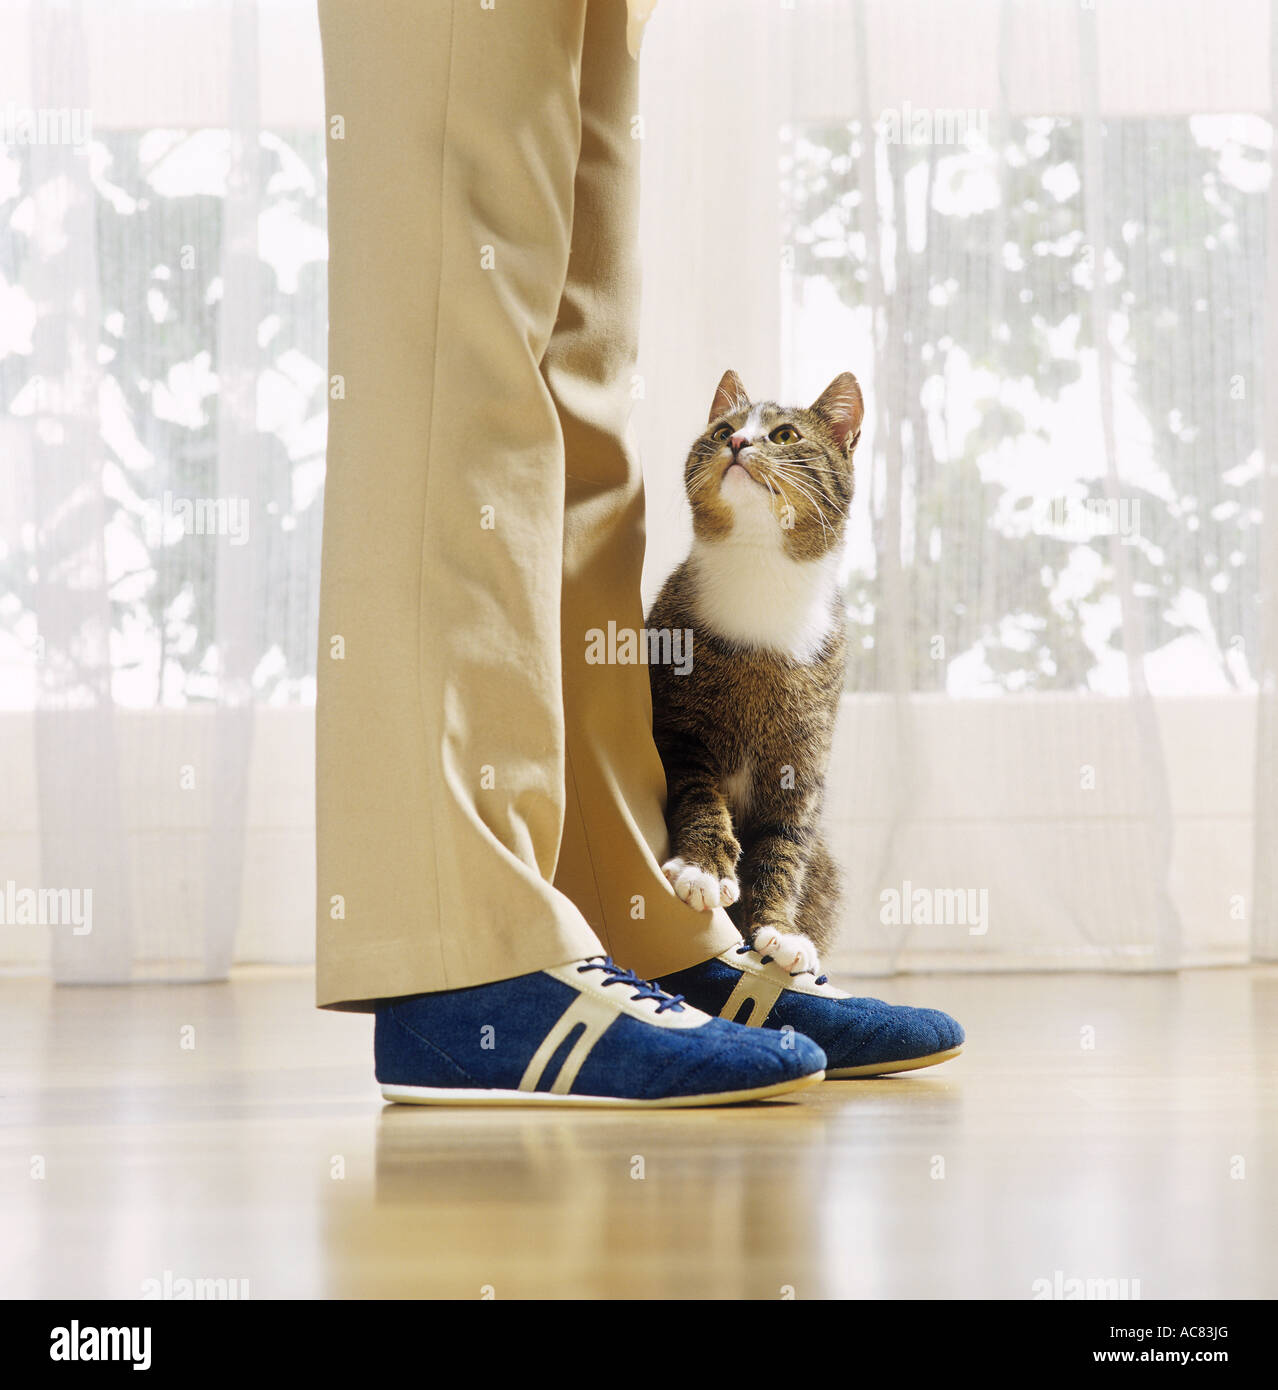 Domestic cat rubbing against legs of owner Stock Photo